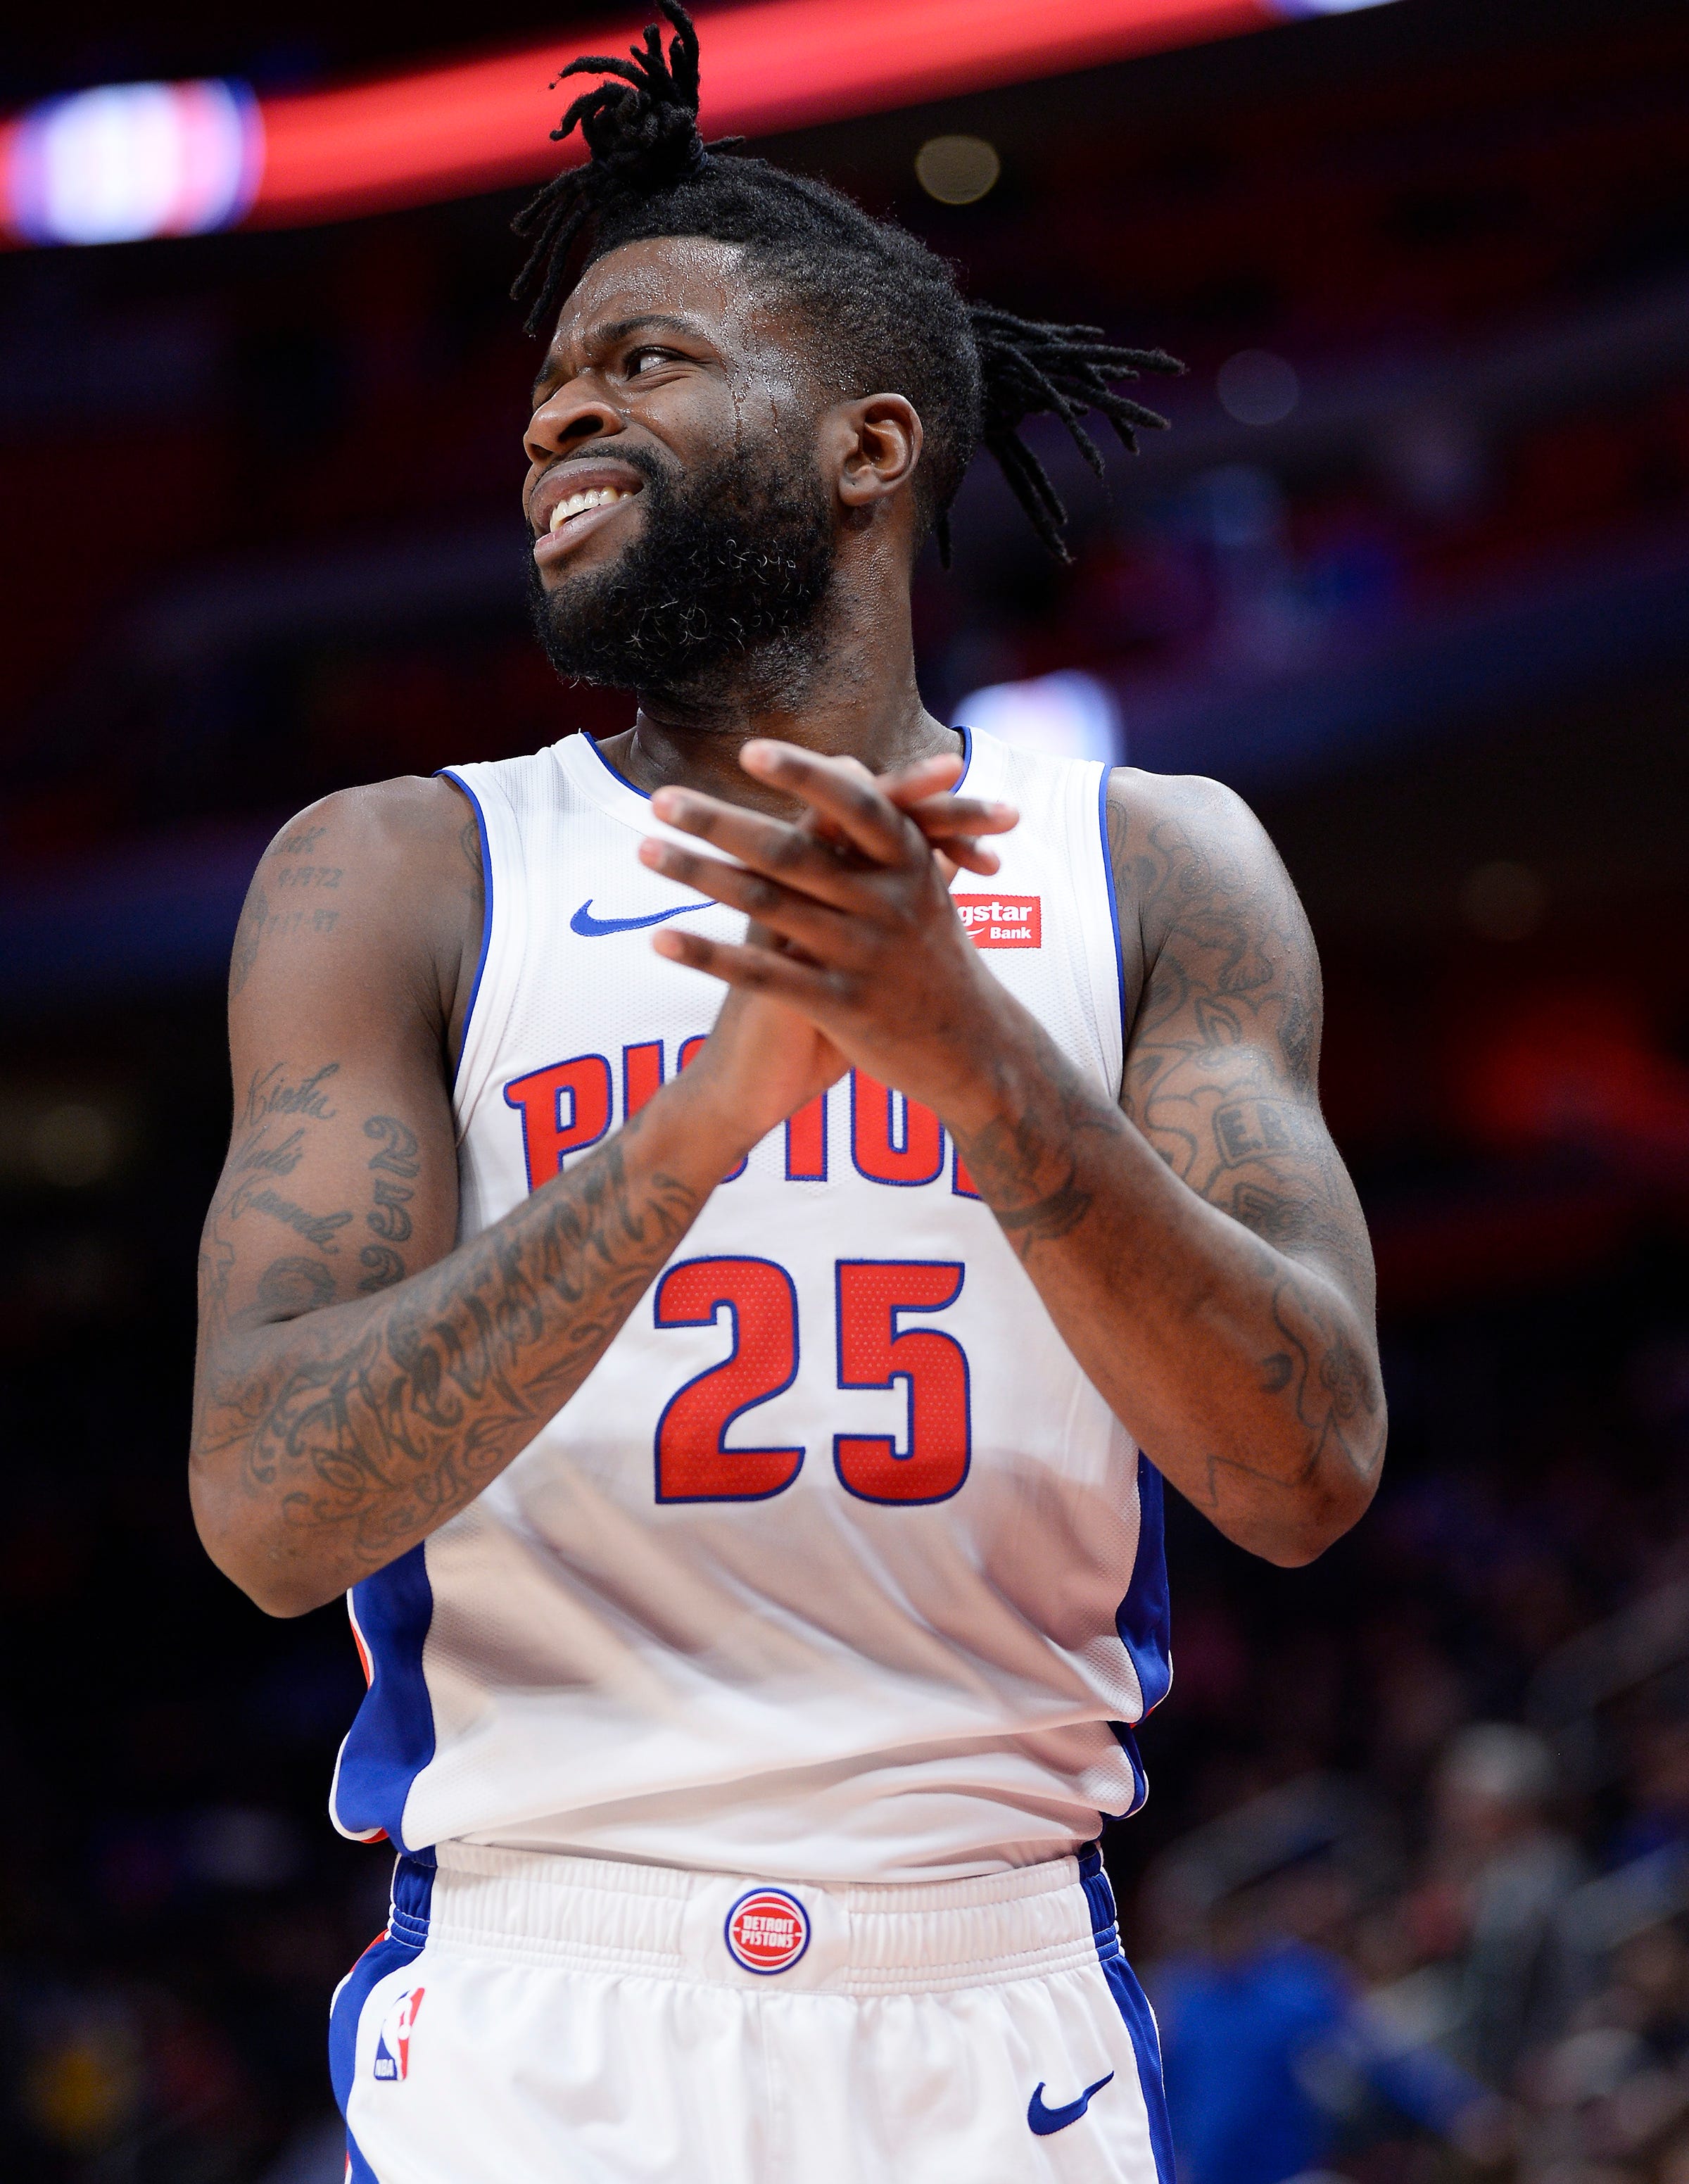 Pistons' Reggie Bullock reacts to a foul called on him in the fourth quarter.